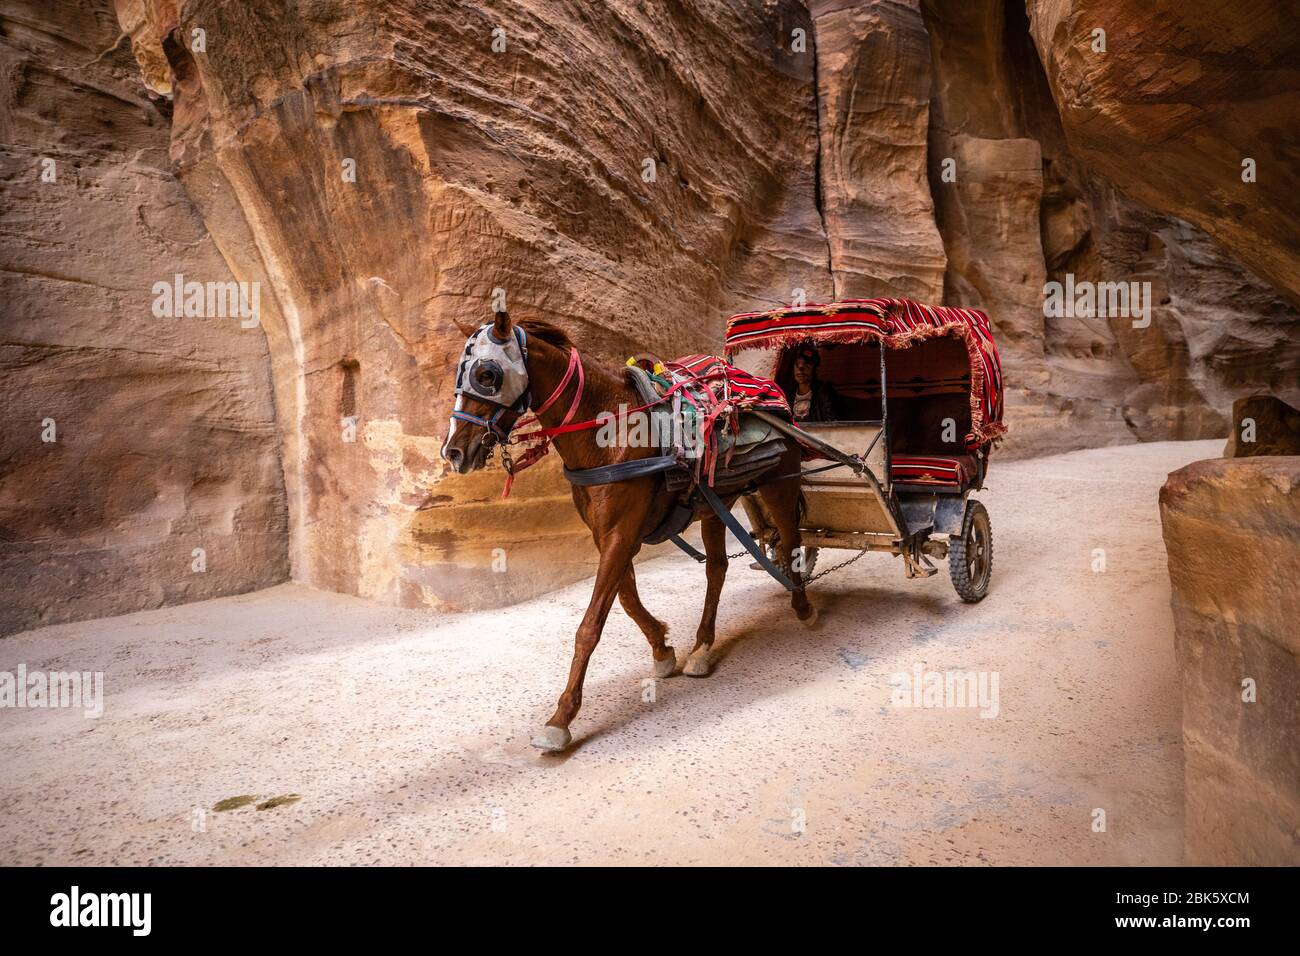 Horse drawn carriages in Siq Slot Canyon at the City of Petra, Jordan Stock Photo